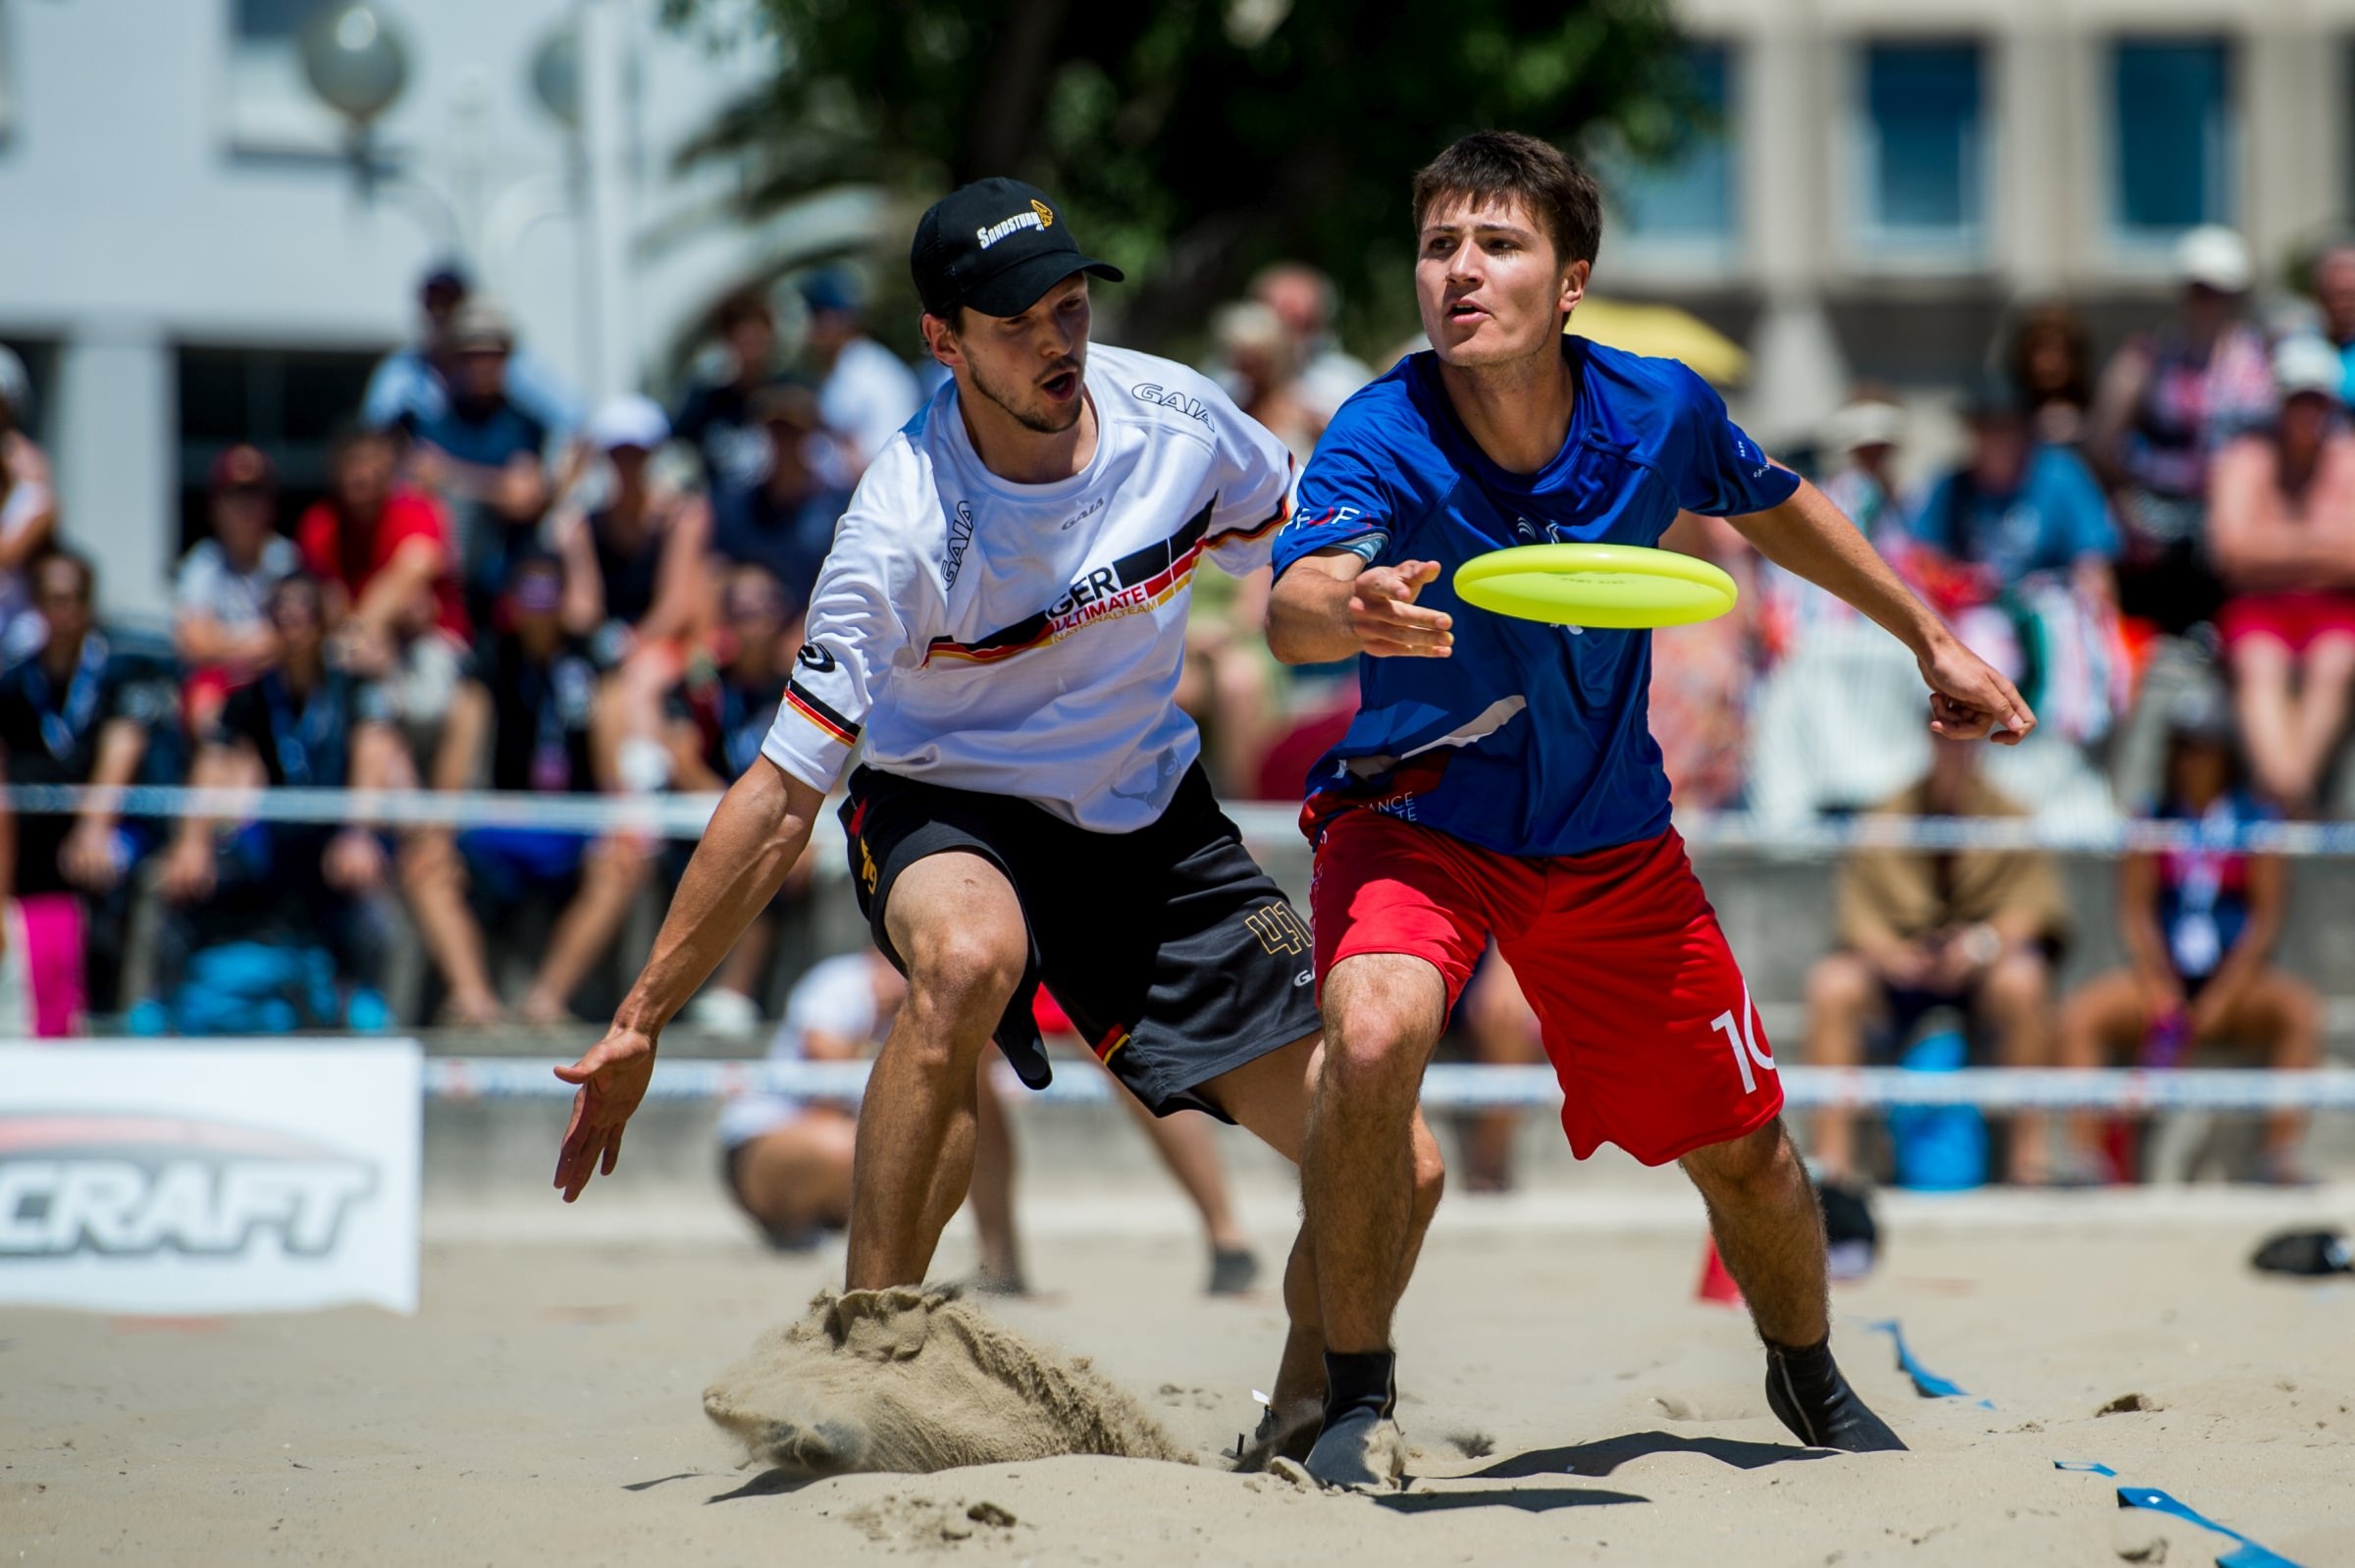 Frisbee: EBUCC 2021, Ultimate Frisbee at the Beach, Ultimate Frisbee Championship, Team sports. 2400x1600 HD Wallpaper.